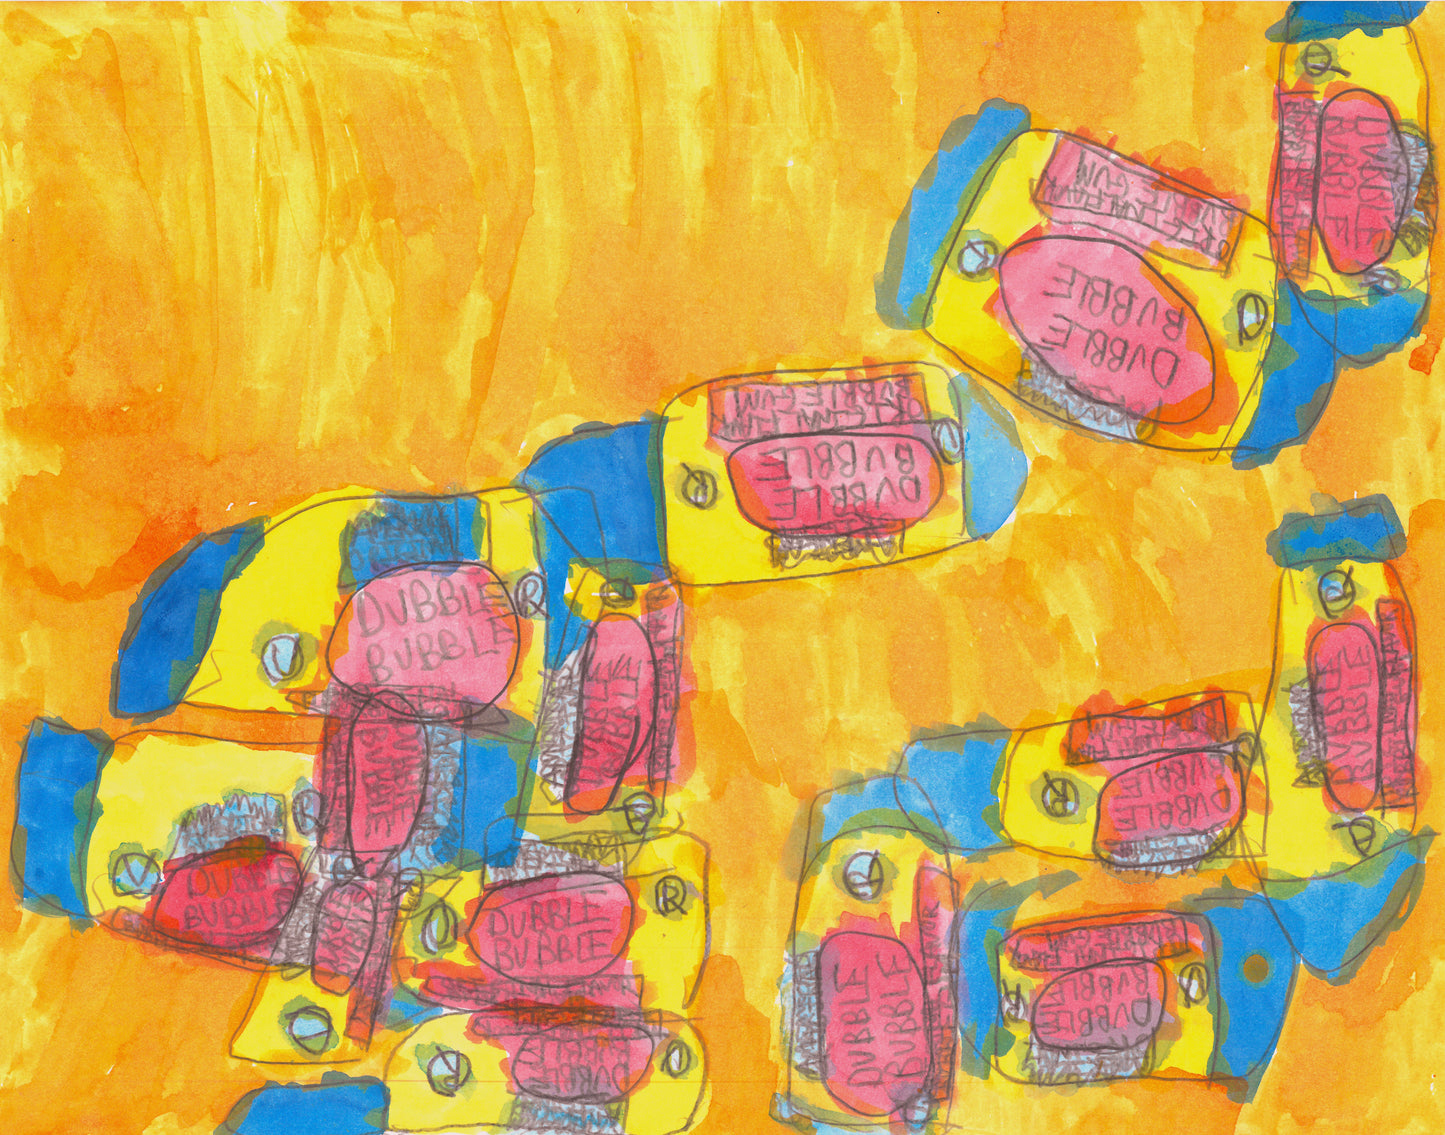 This is a painting that has a yellow background and painted drawings of "dubble bubble" bubble gum